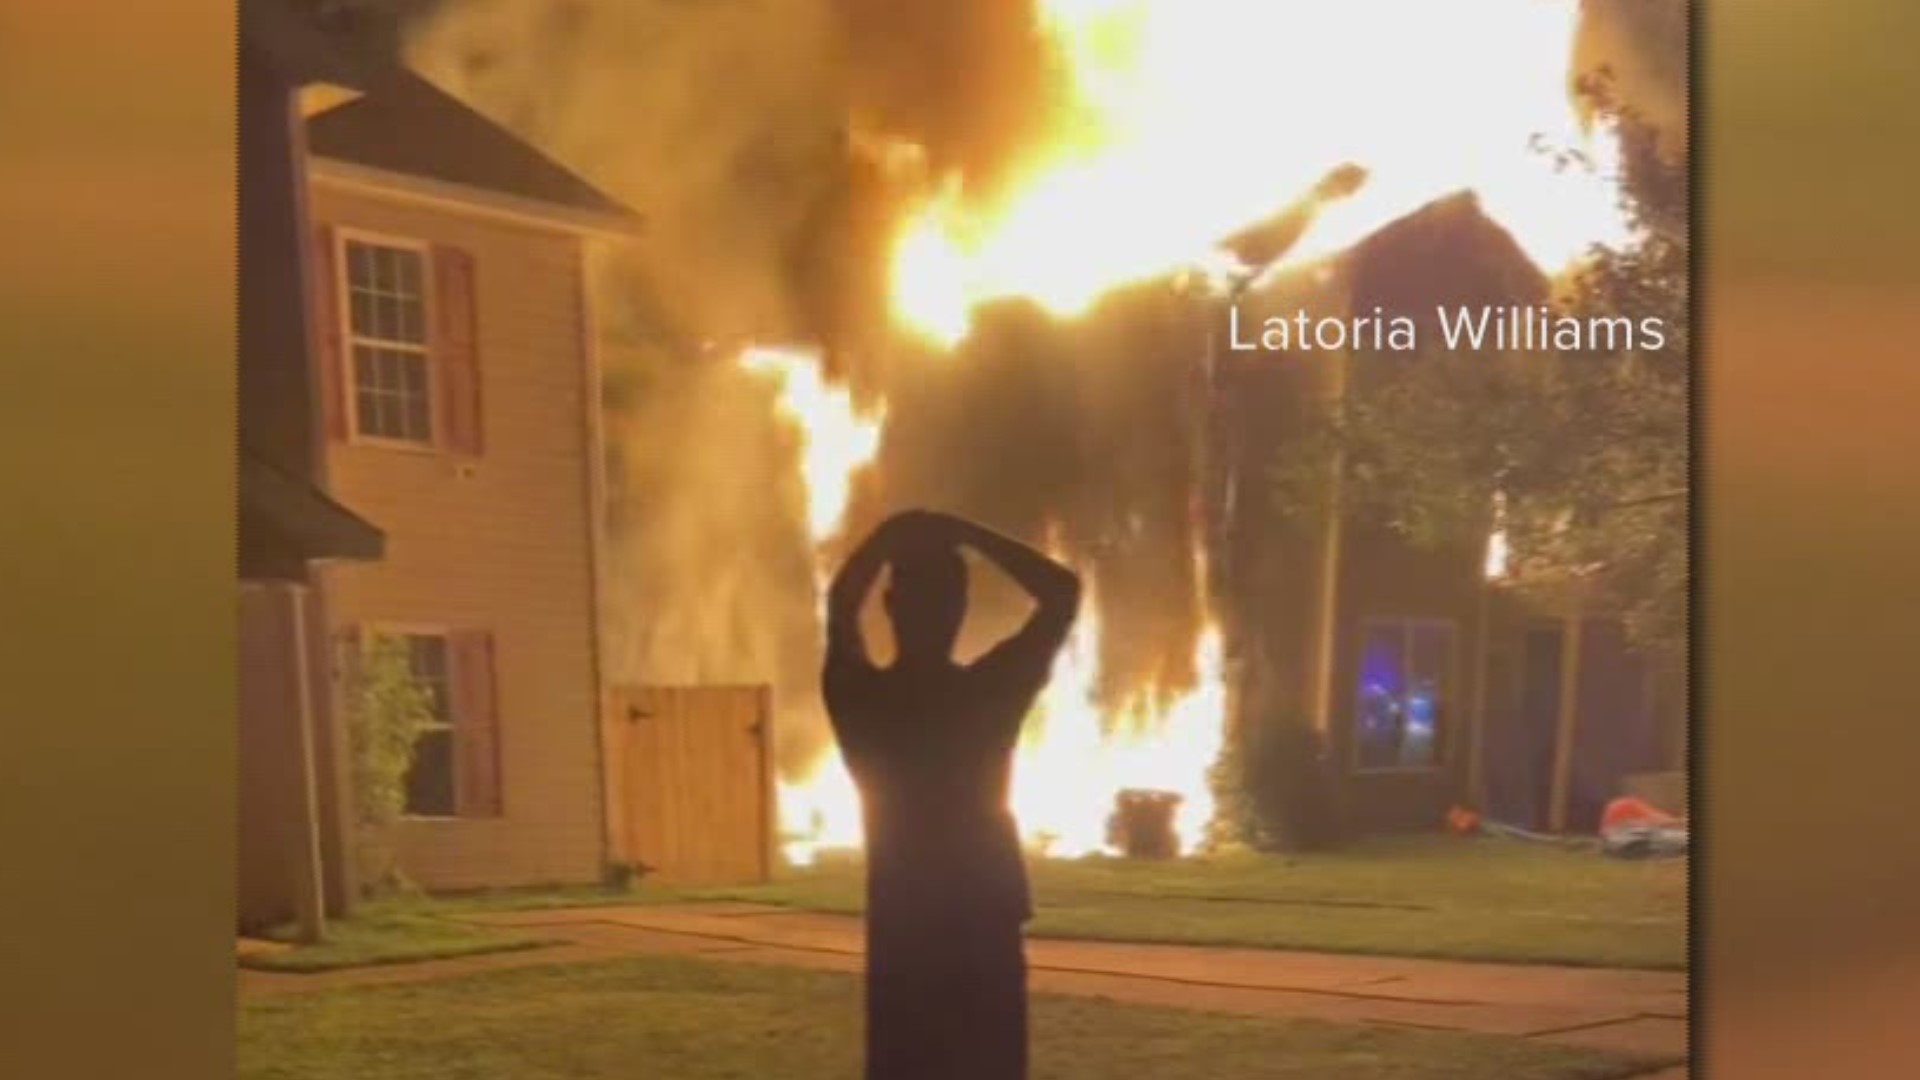 11 people were displaced from a Charlotte home after fireworks improperly disposed caused a house fire.